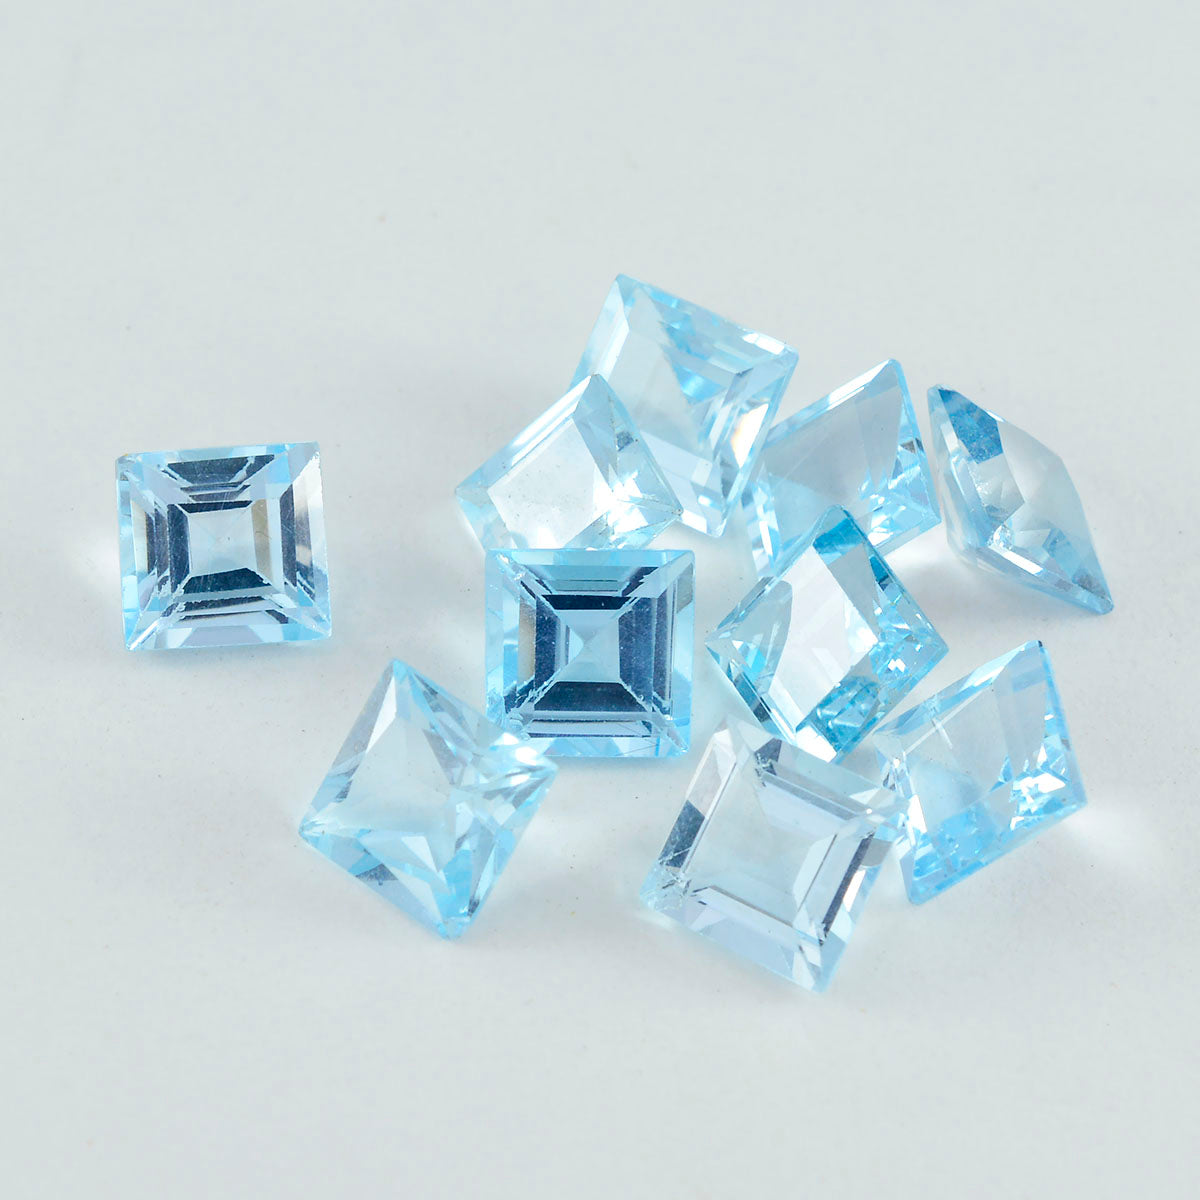 Riyogems 1PC Real Blue Topaz Faceted 6x6 mm Square Shape Nice Quality Stone